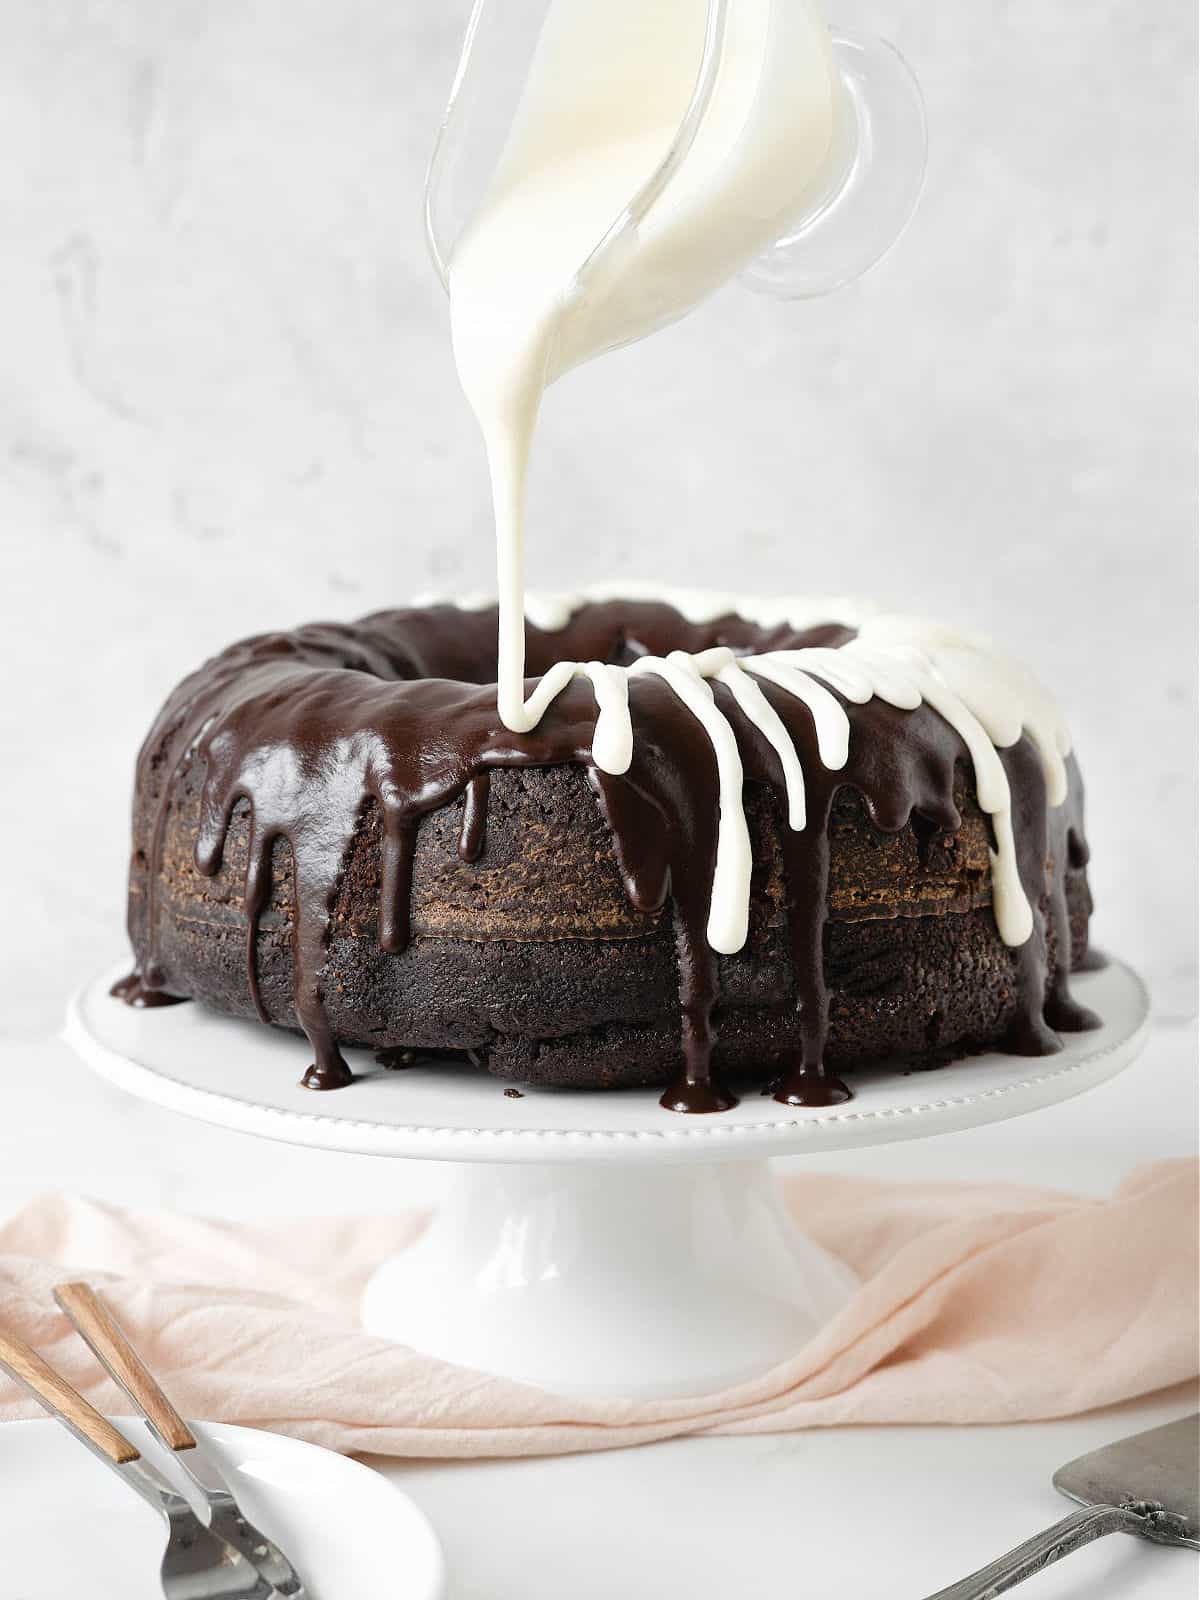 Drizzling cream cheese icing from a pitcher on a chocolate-glazed chocolate bundt cake on a white cake stand. Pink cloth beneath and grey background.